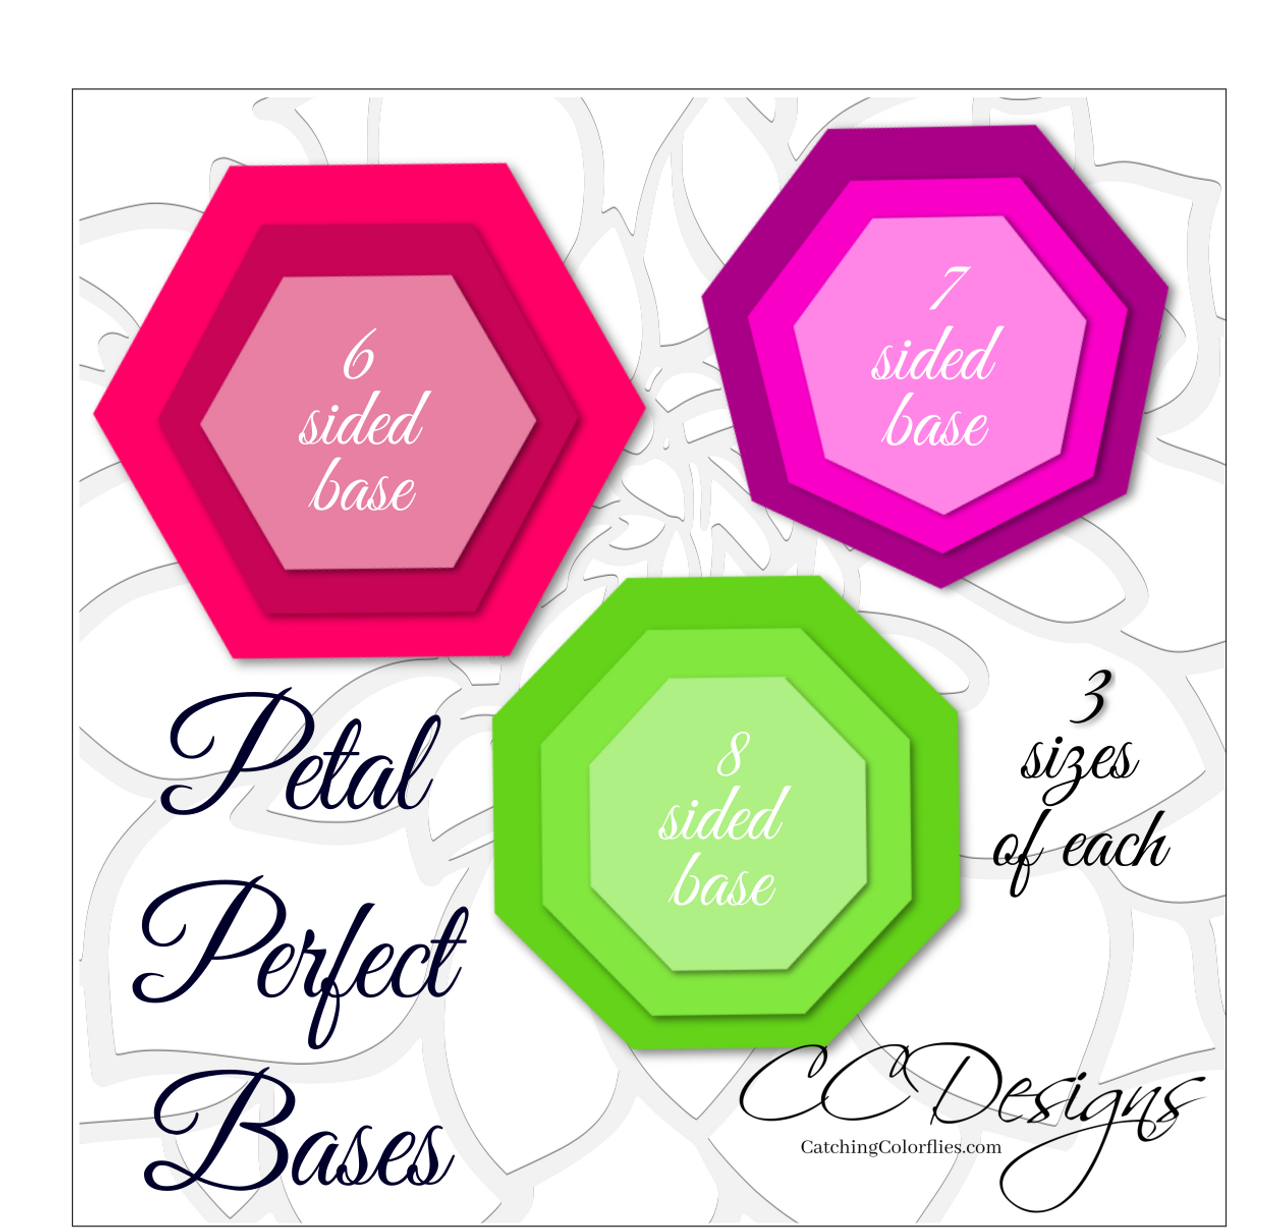 Download Petal Perfect Bases For Large Giant Paper Flower Templates Catching Colorflies